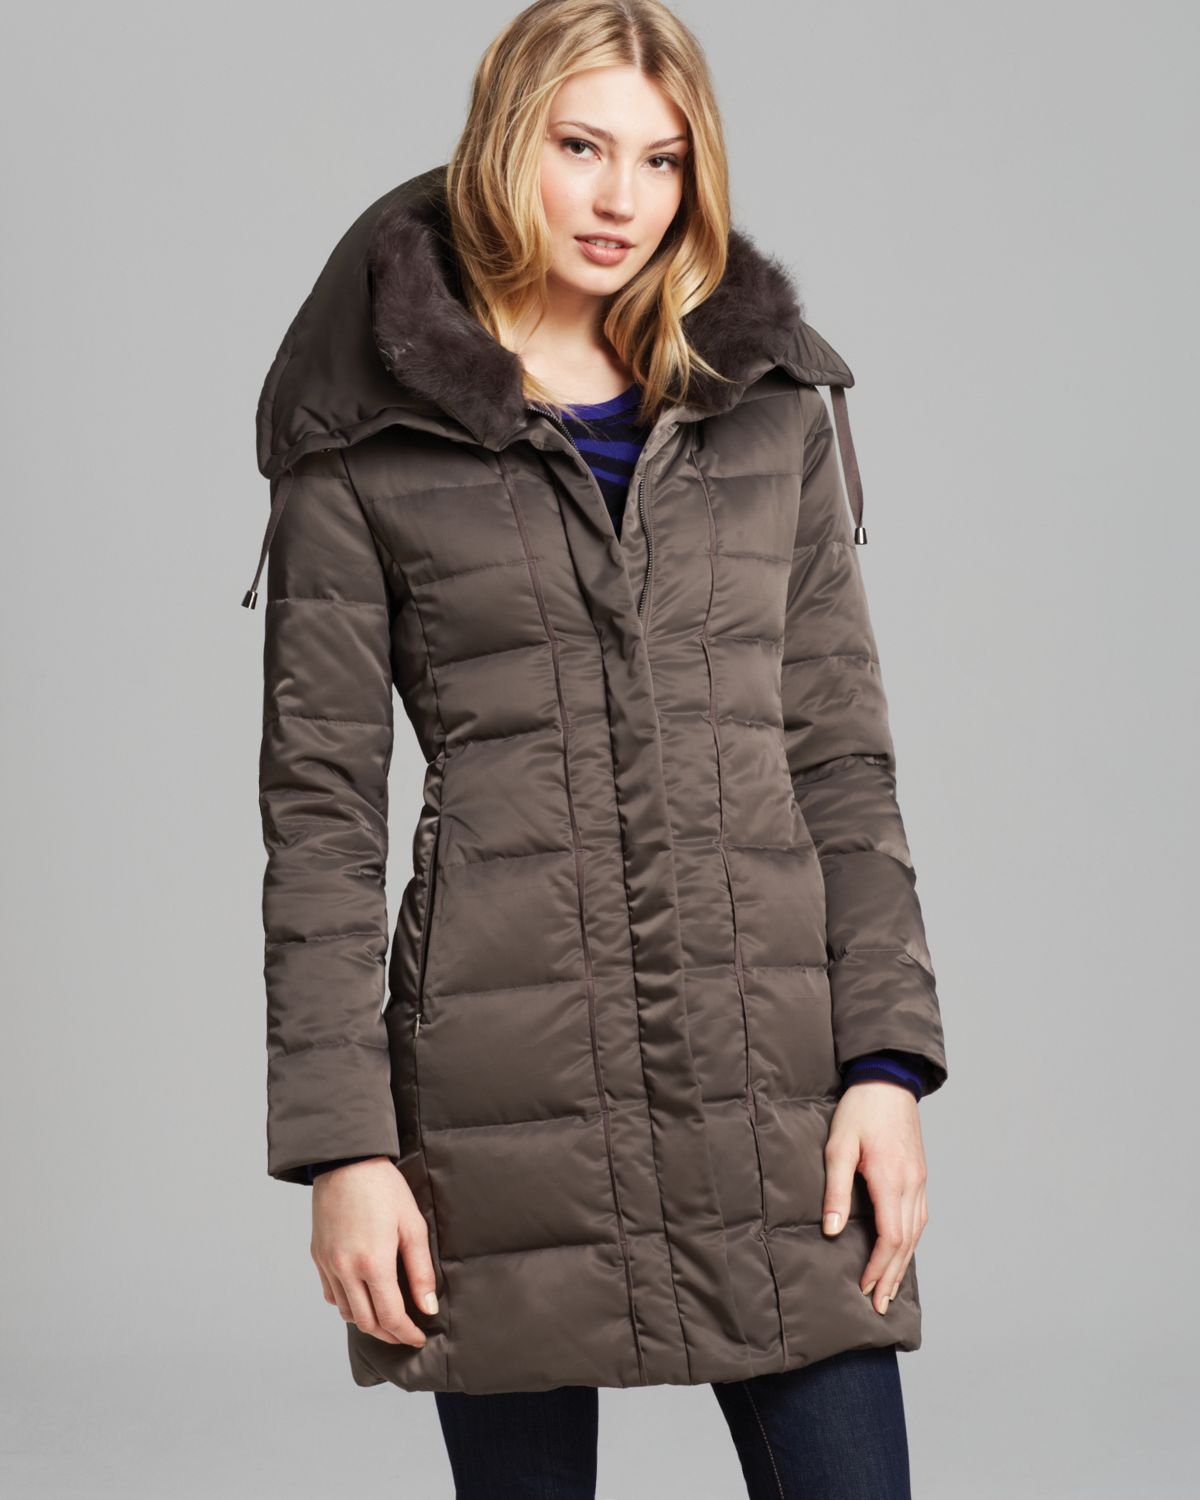 Lyst - Elie Tahari Quilted Down Coat With Fur Collar in Gray